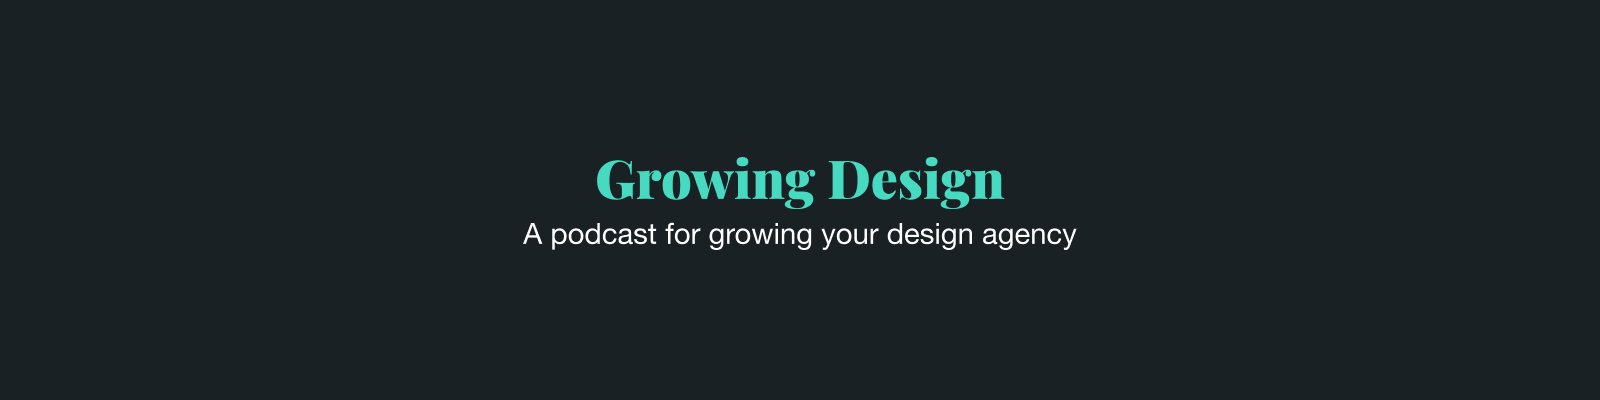 Growing Design Podcast